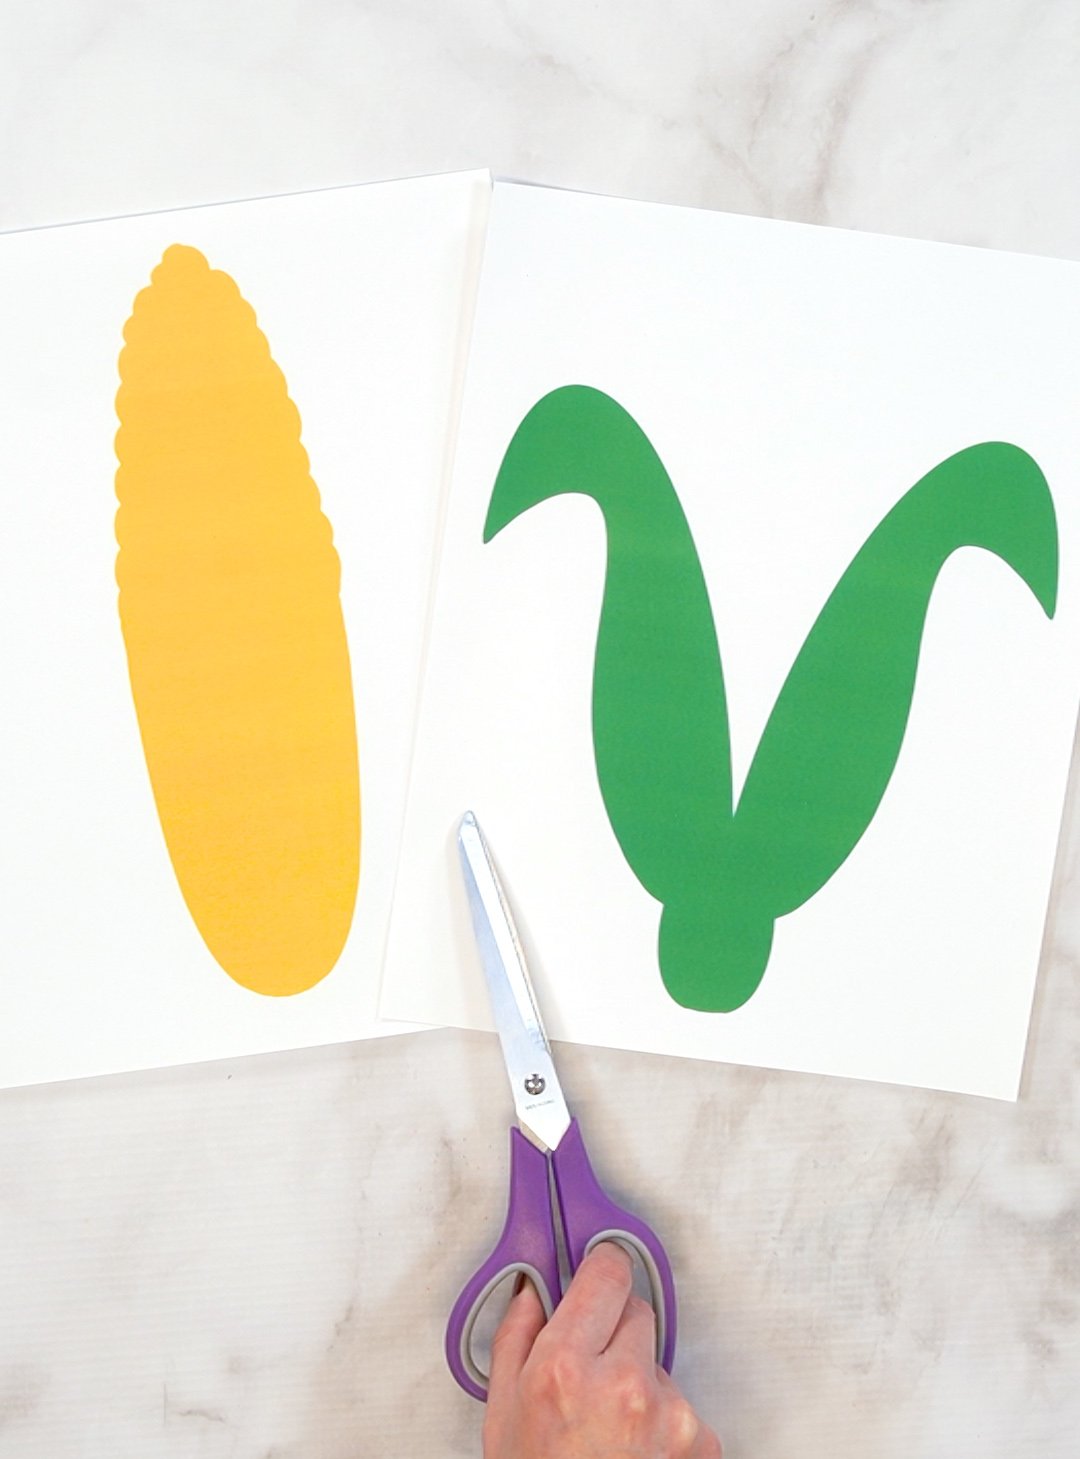 Two sheets of paper with printed corn template and purple scissors